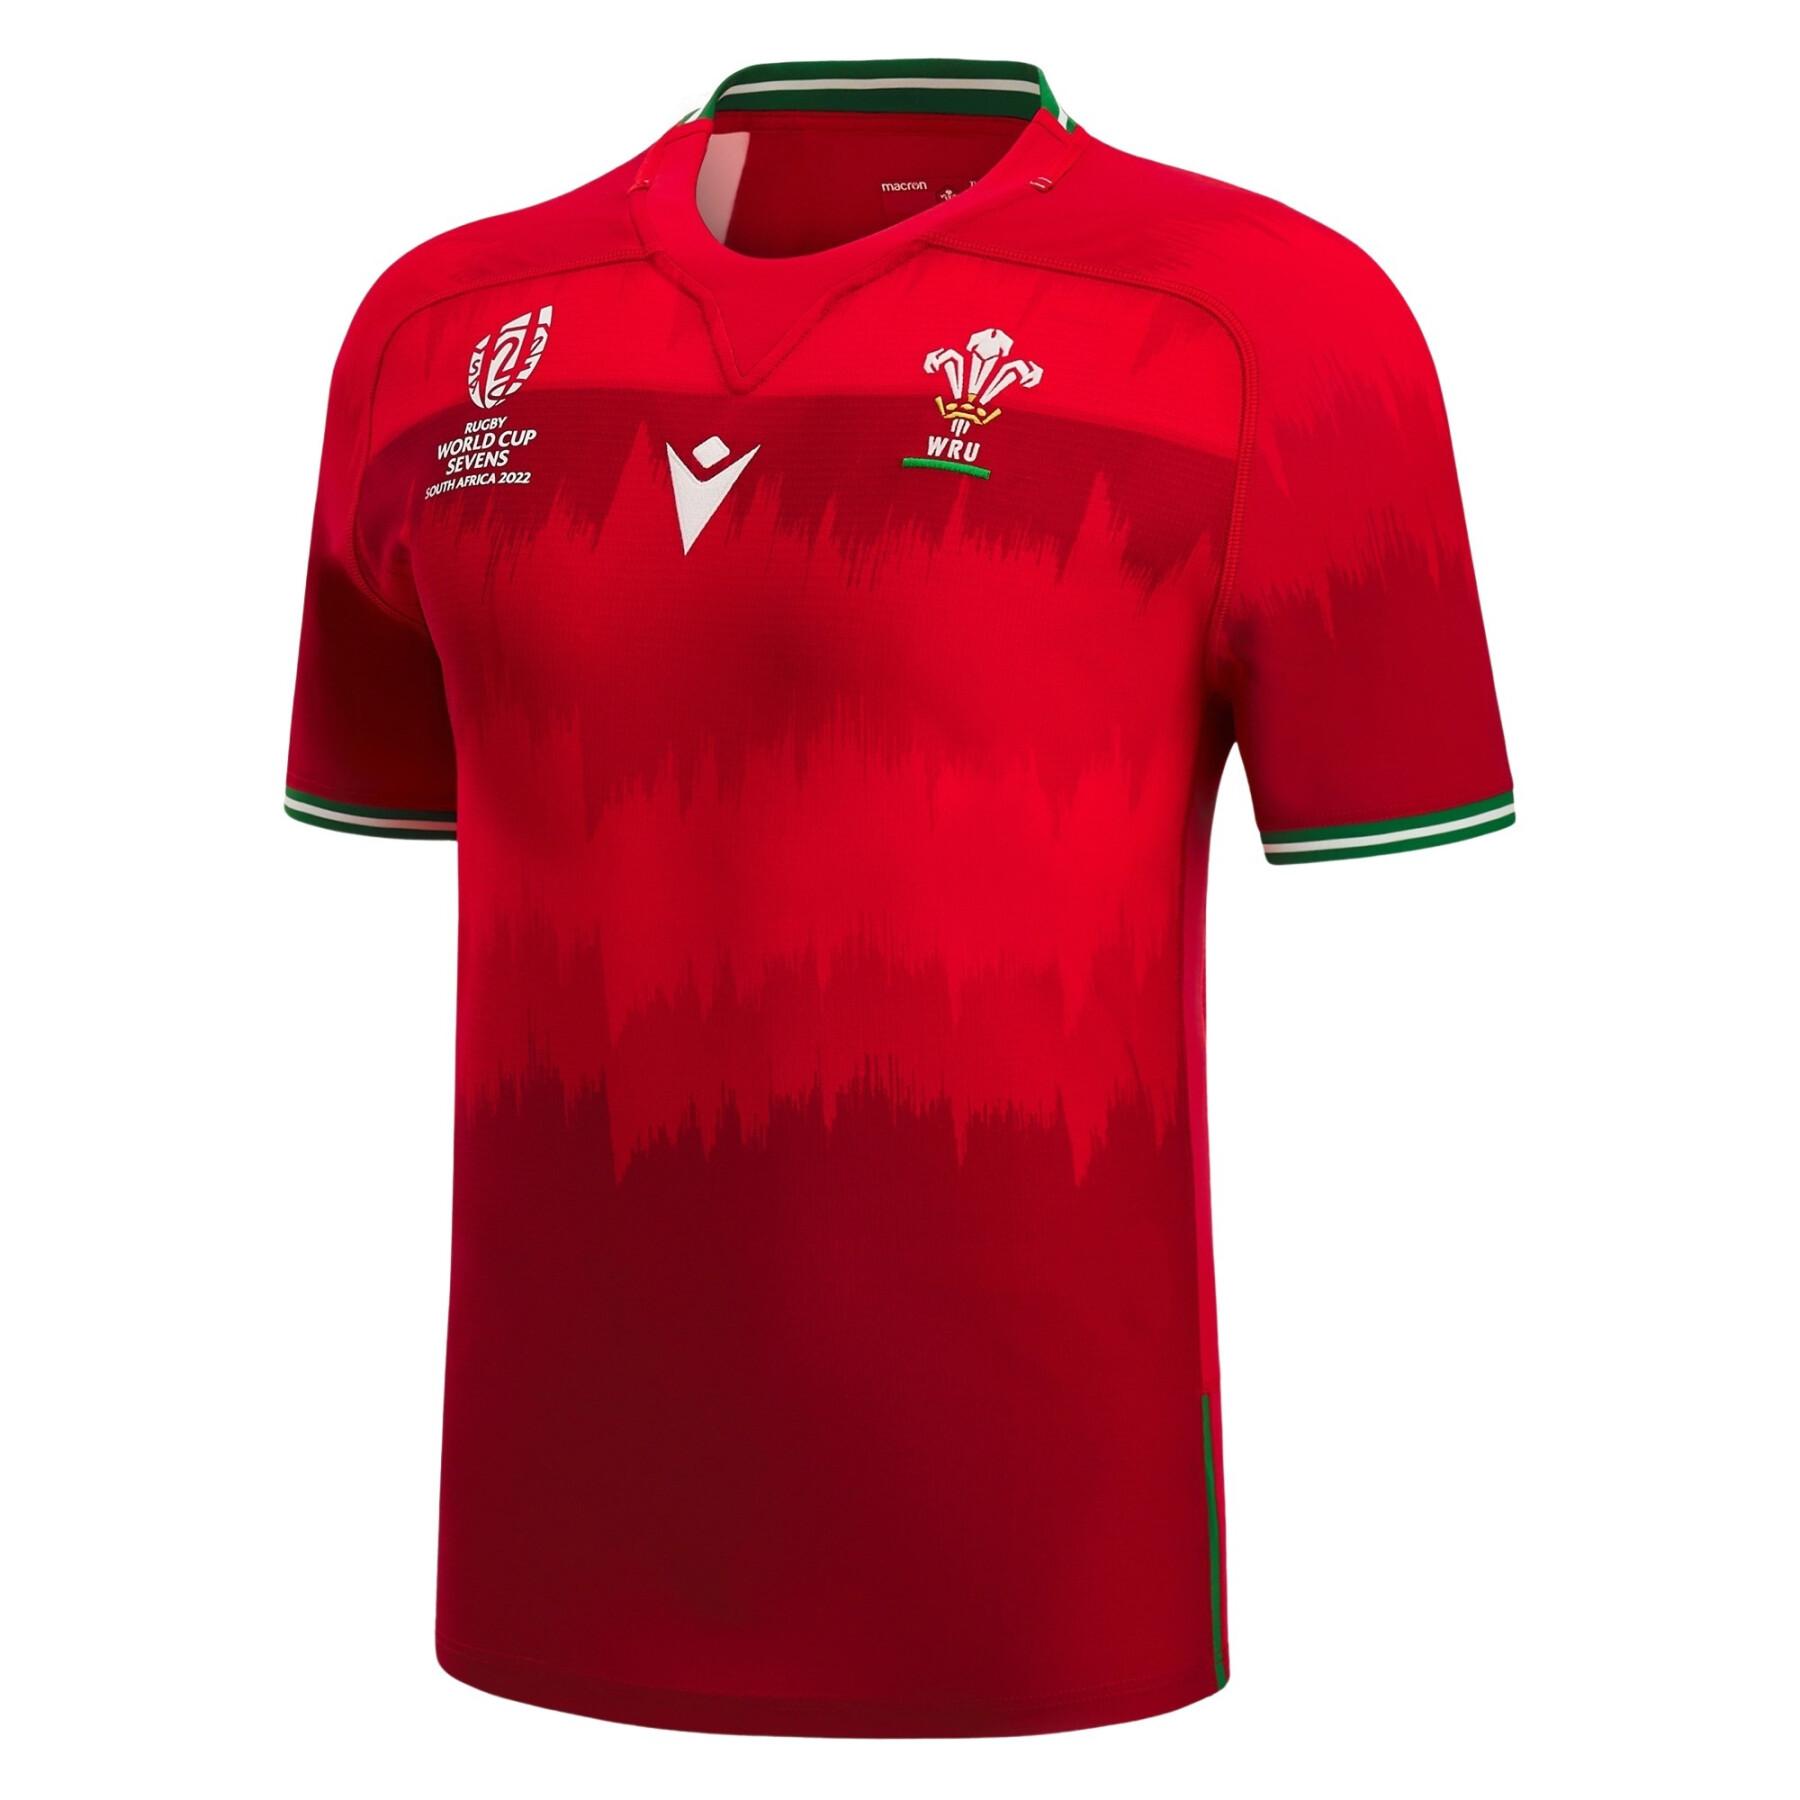 Home jersey Pays de Galles Rugby XV 7S RWC 2023